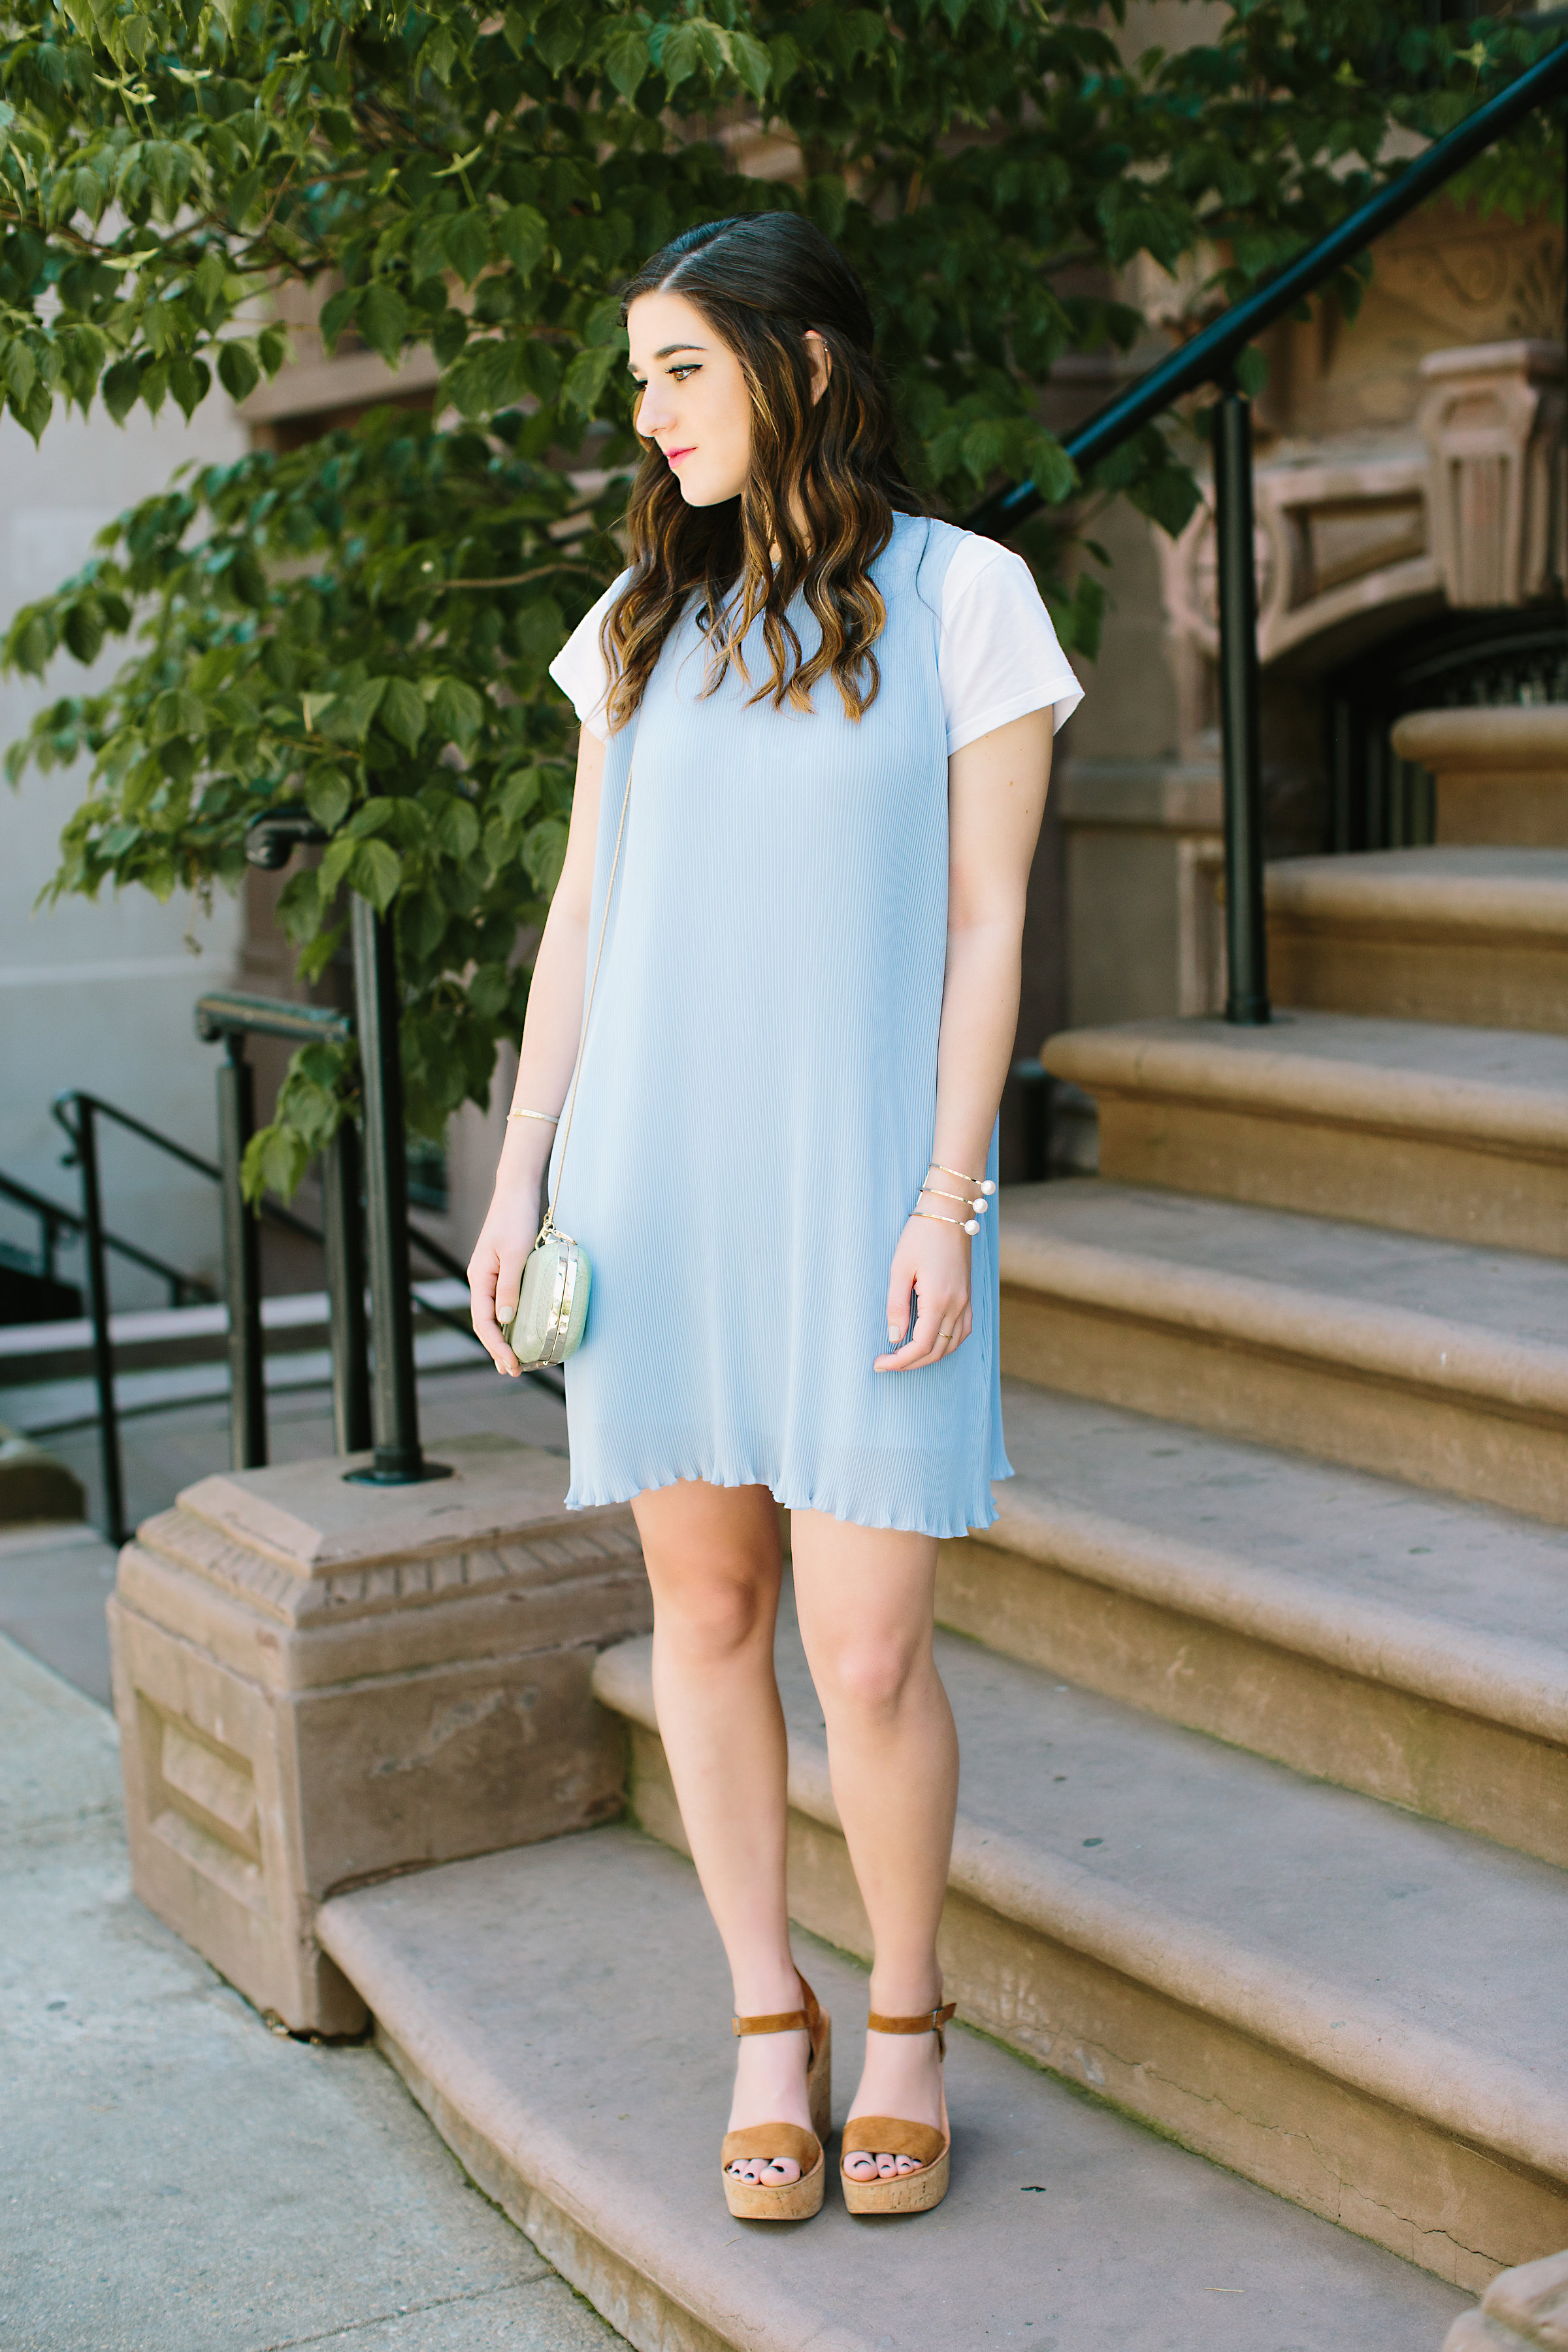 Pastel Blue Pleated Dress Keepsake The Label Louboutins & Love Fashion Blog Esther Santer NYC Street Style Blogger Outfit OOTD Pretty Photoshoot Upper East Side Dolce Vita Wedges Gold Jewelry Clutch Club Monaco Women White Tee Shirt Summer Look Inspo.jpg